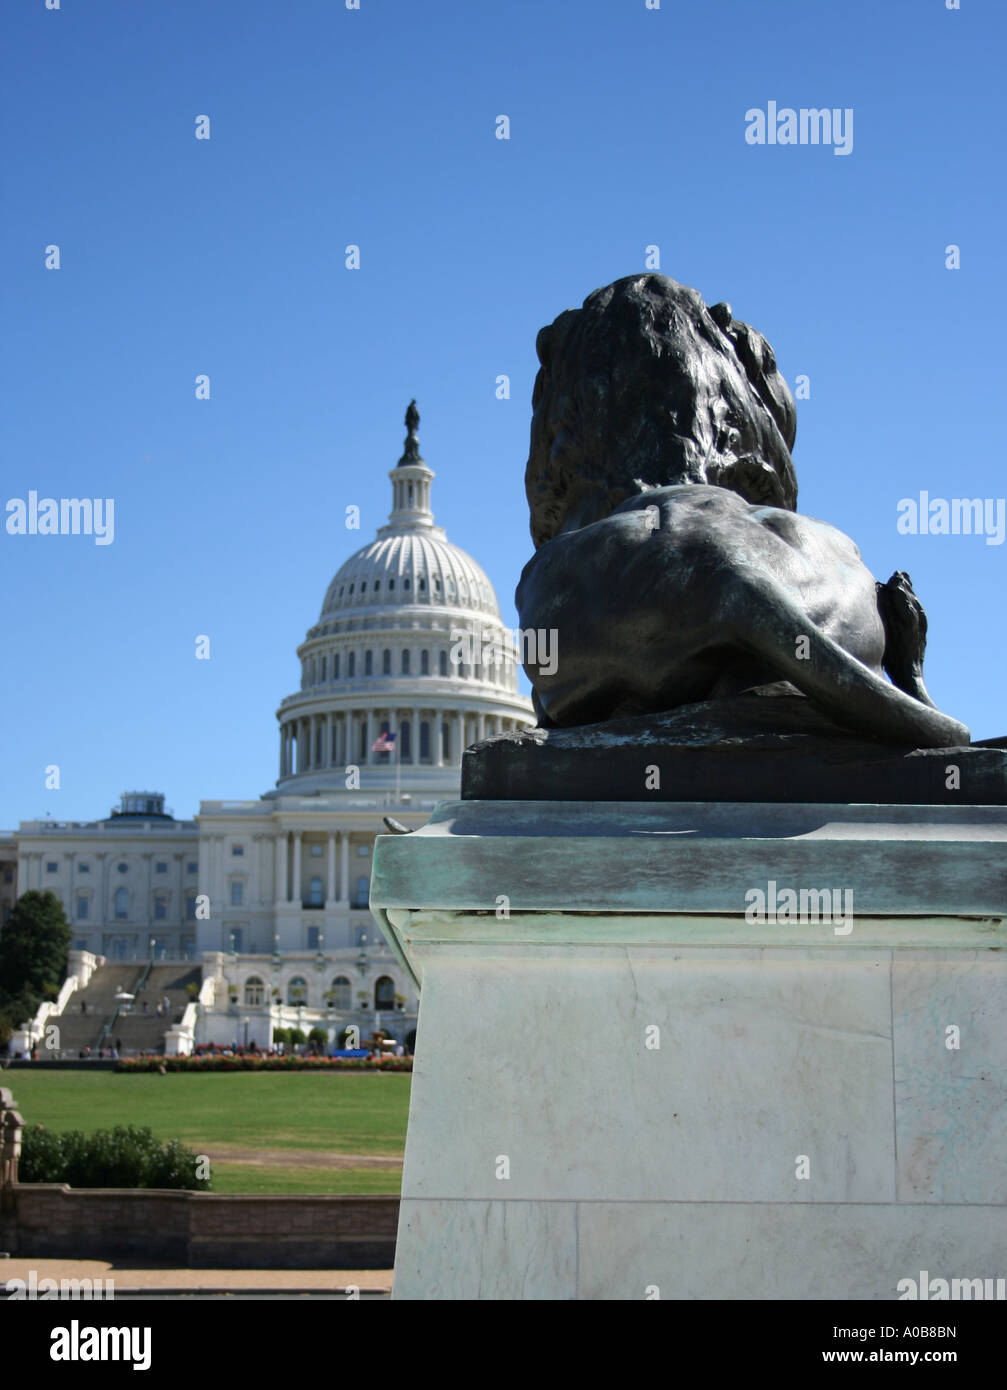 rear-view-of-lion-statue-and-dome-of-us-